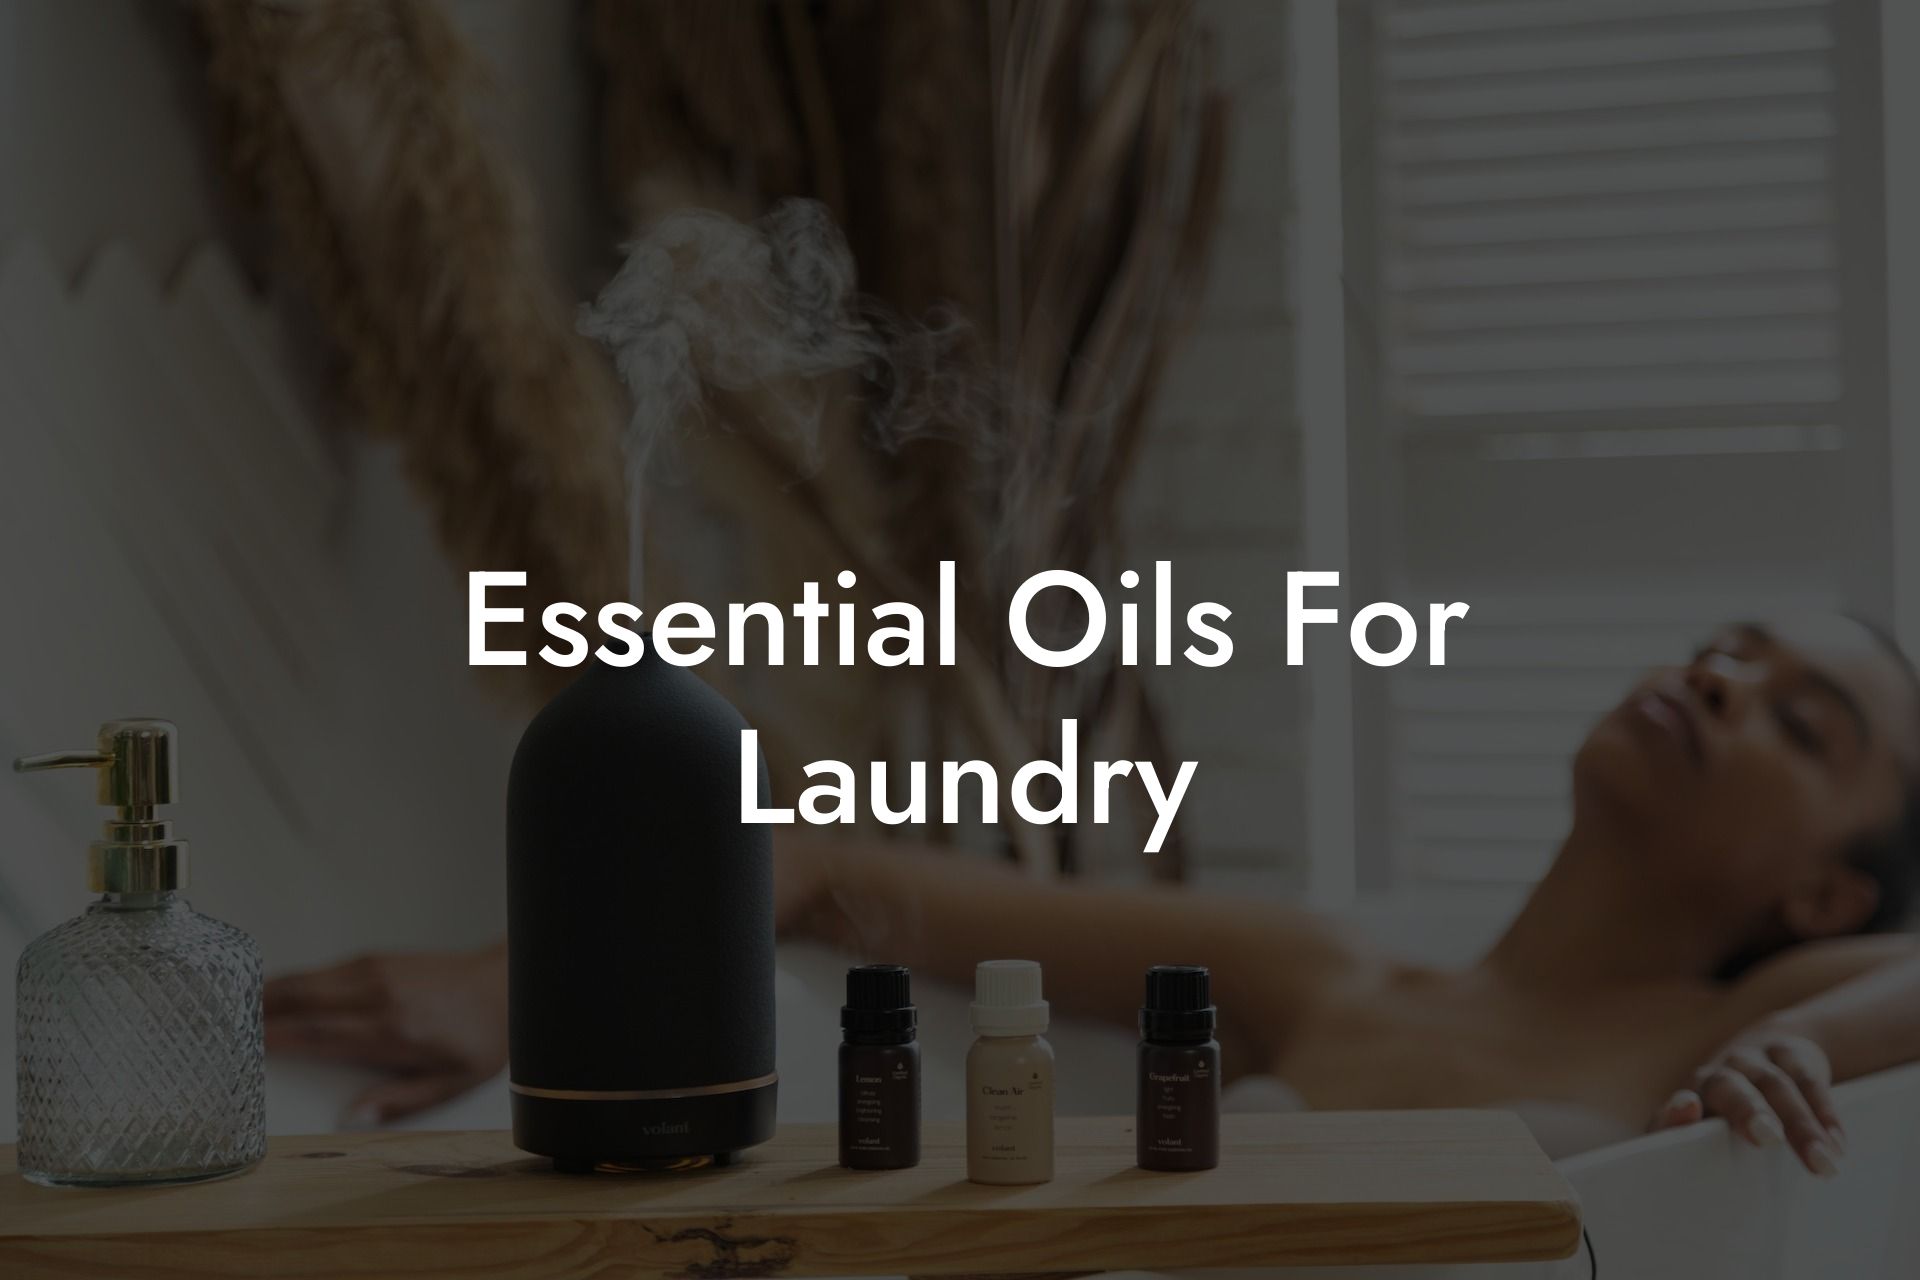 Essential Oils For Laundry